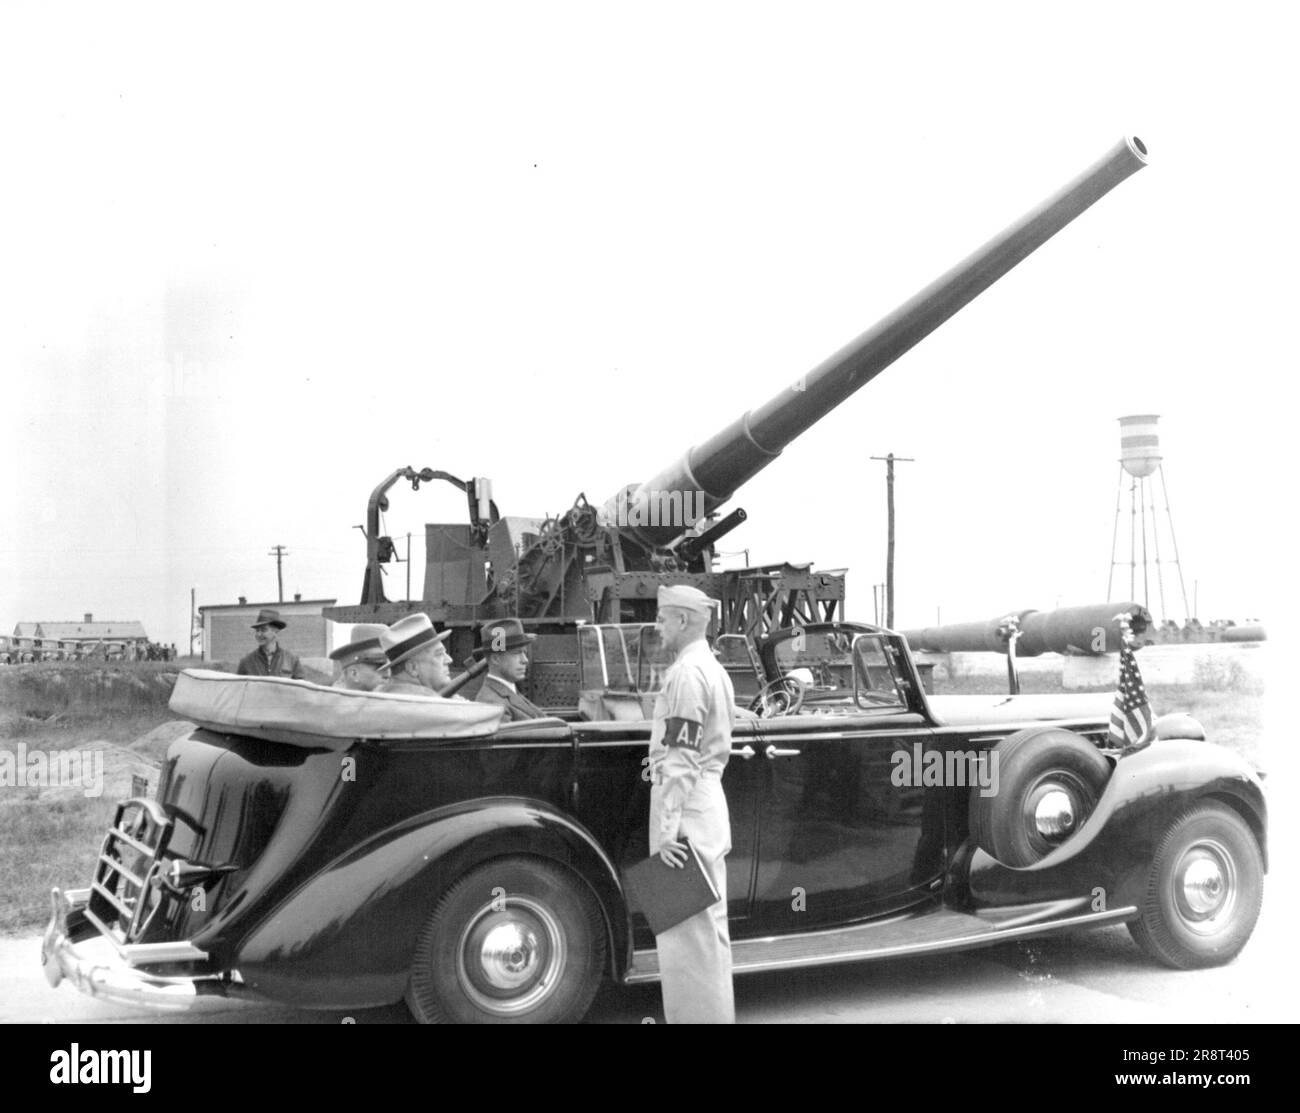 FDR Sees Anti-Craft Guns -- President Rossevelt got a close-up view of guns the army would use to protect the nation against aerial bombardment when he visited the army's proving ground at Aberdeen, Md., Sept. 30 with the President as he drives past a battery of mobile anti-aircraft guns is Major General C.M. Wesson, army Chief of ordnance. September 30, 1940. (Photo by Associated Press Photo). Stock Photo